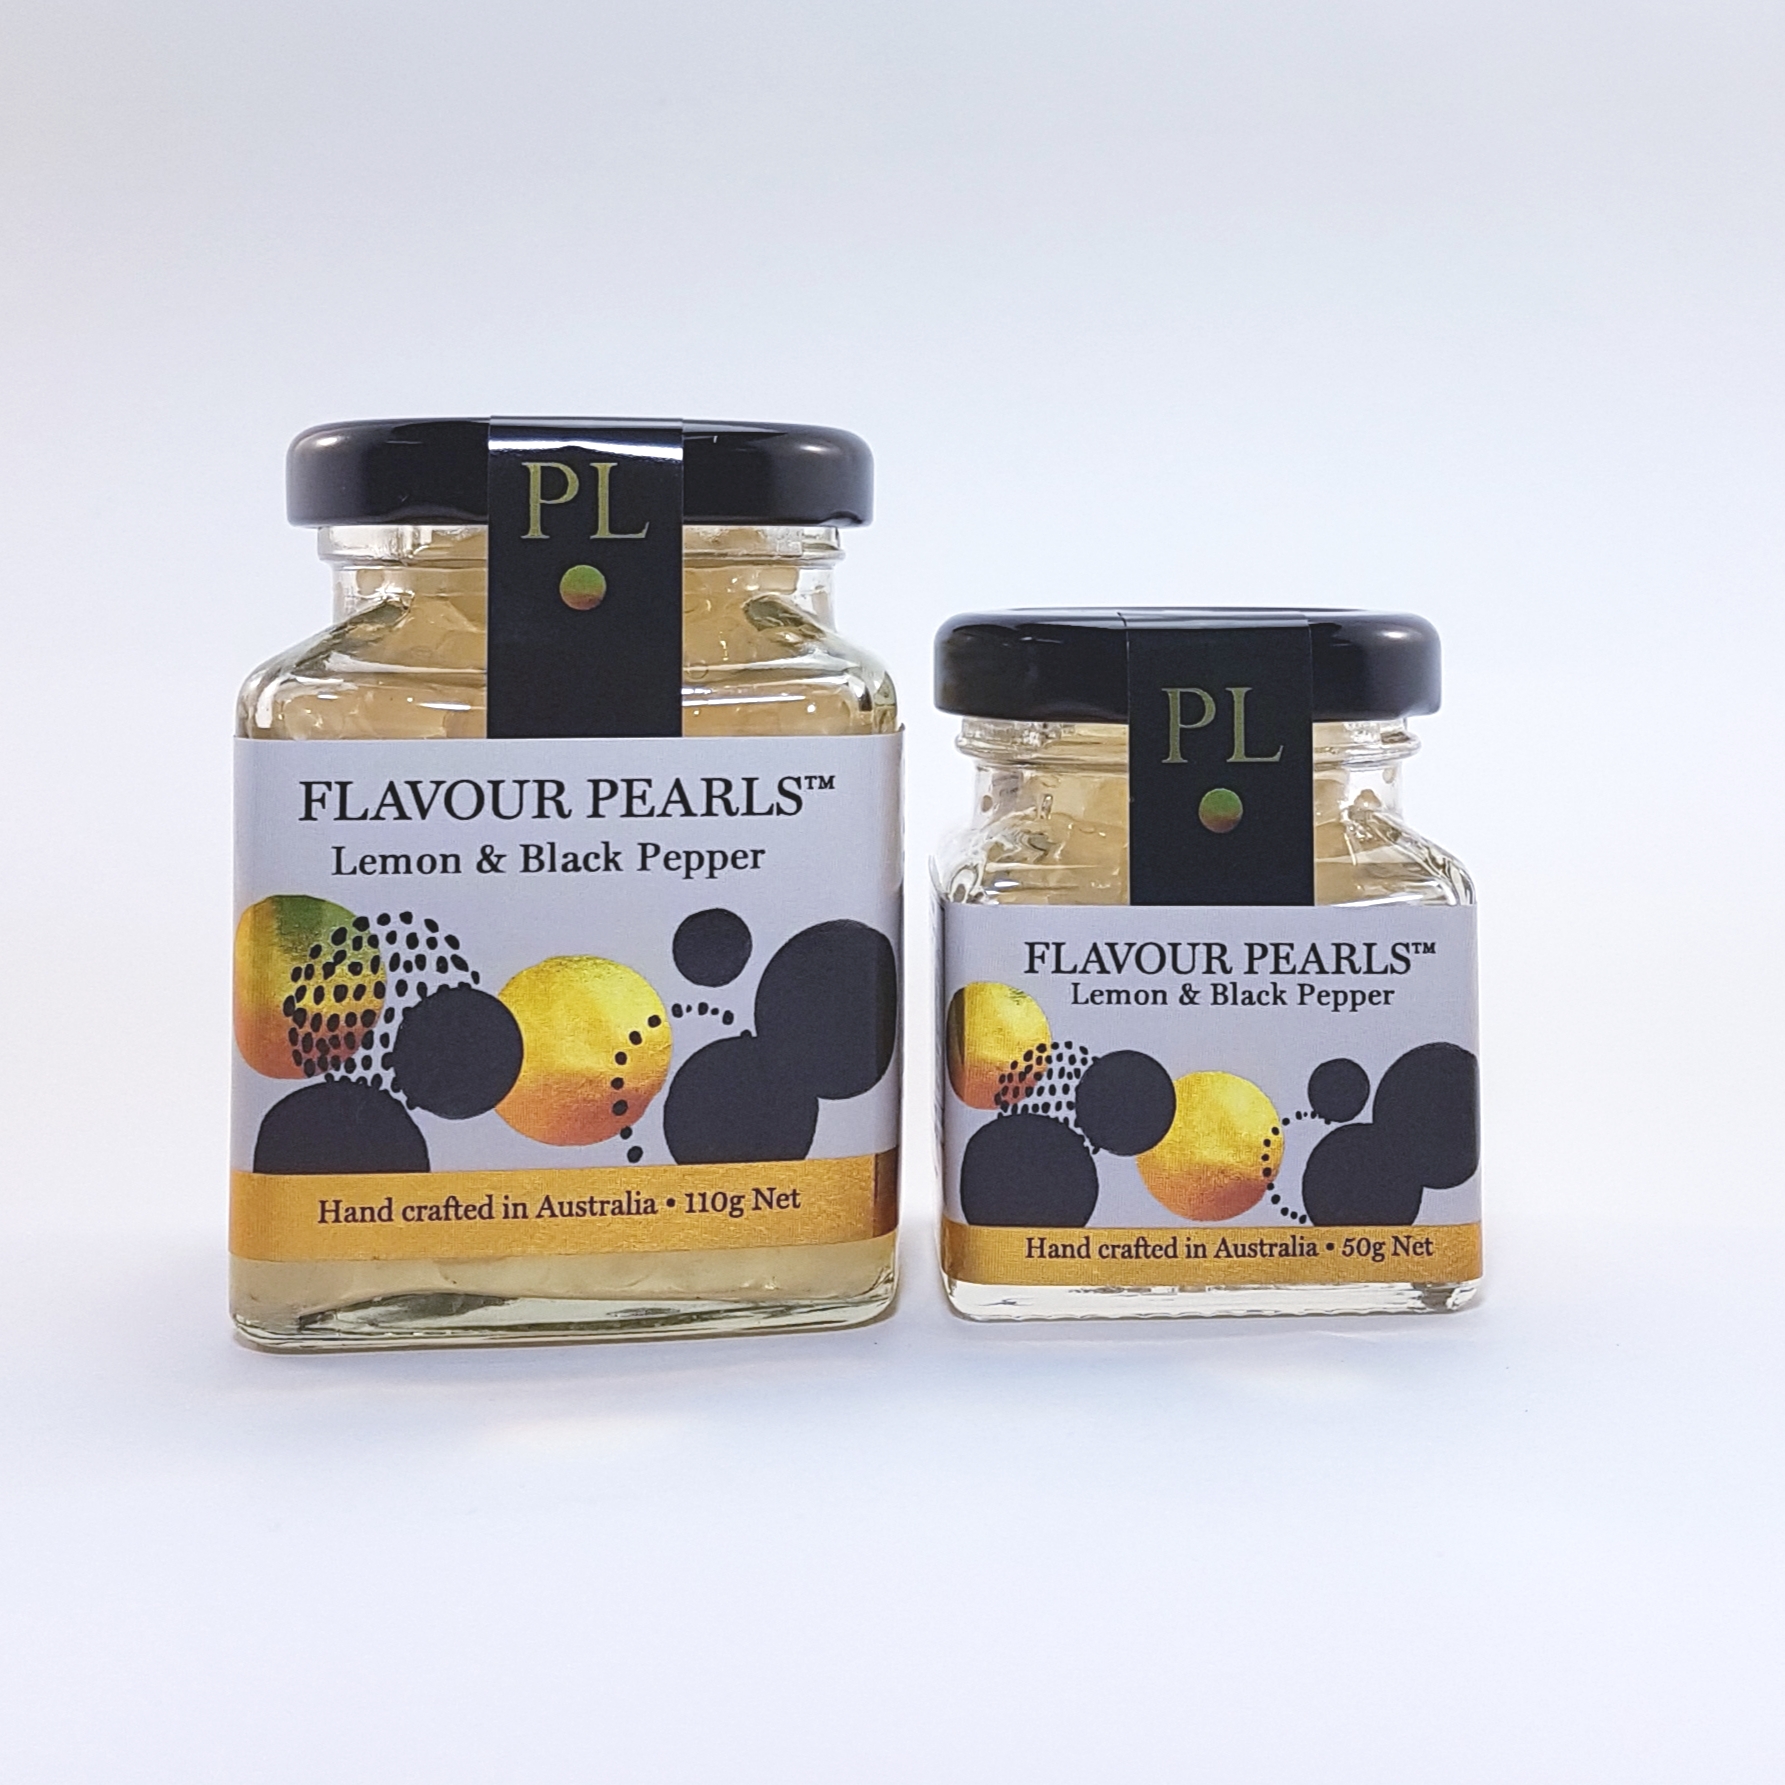 Lemon and Black Pepper Flavour Pearls 110g and 50g Jars